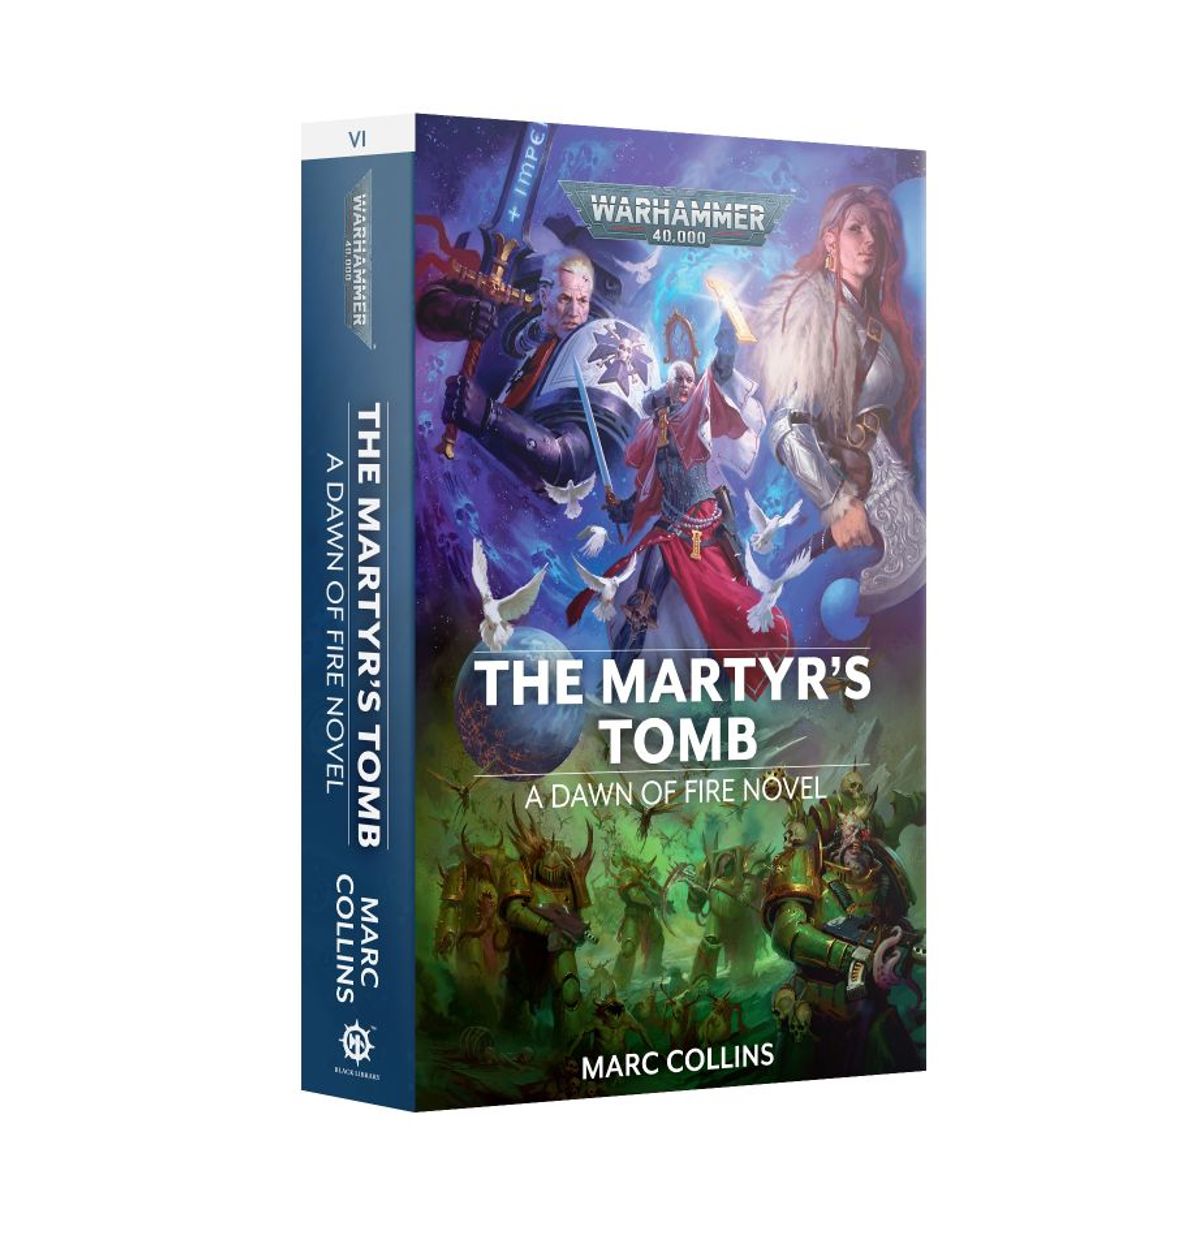 The Martyr's Tomb (Book 6)